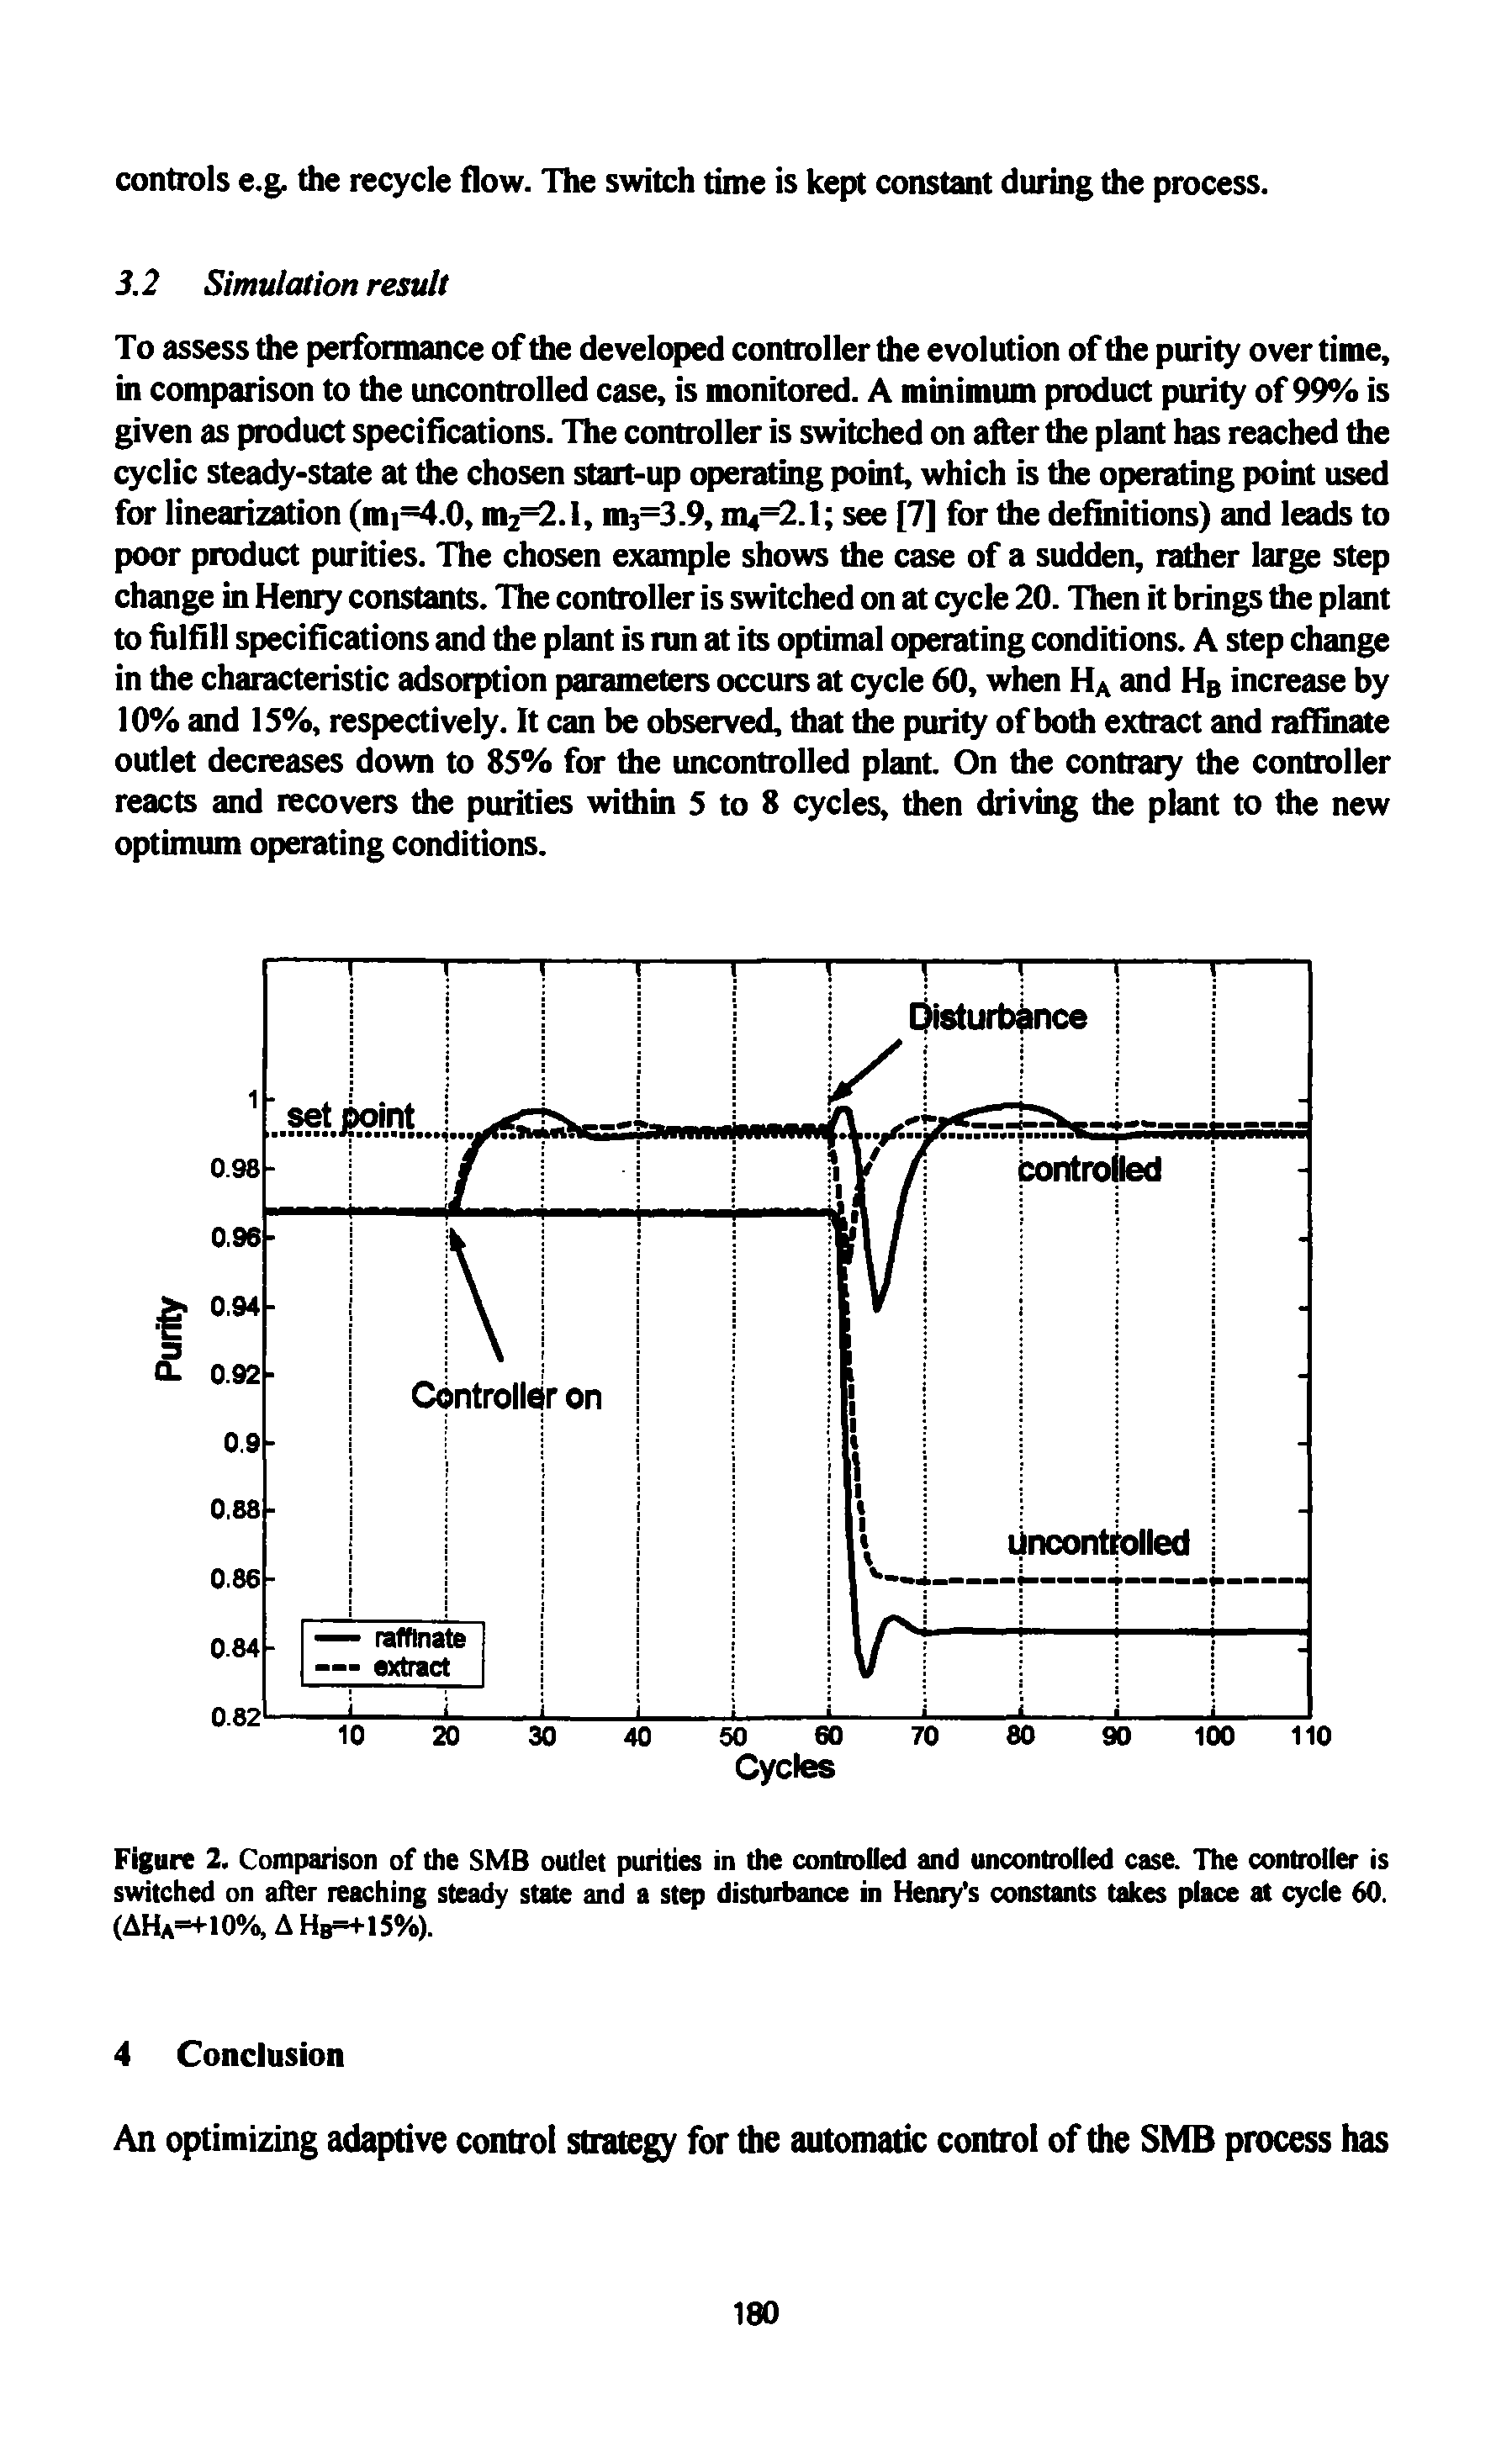 Figure 2. Comparison of the SMB outlet purities in the controlled and uncontrolled case. The controller is switched on after reaching steady state and a step disturbance in Henry s constants takes place at cycle 60. (AHa=+10%, a Hb=+15%).